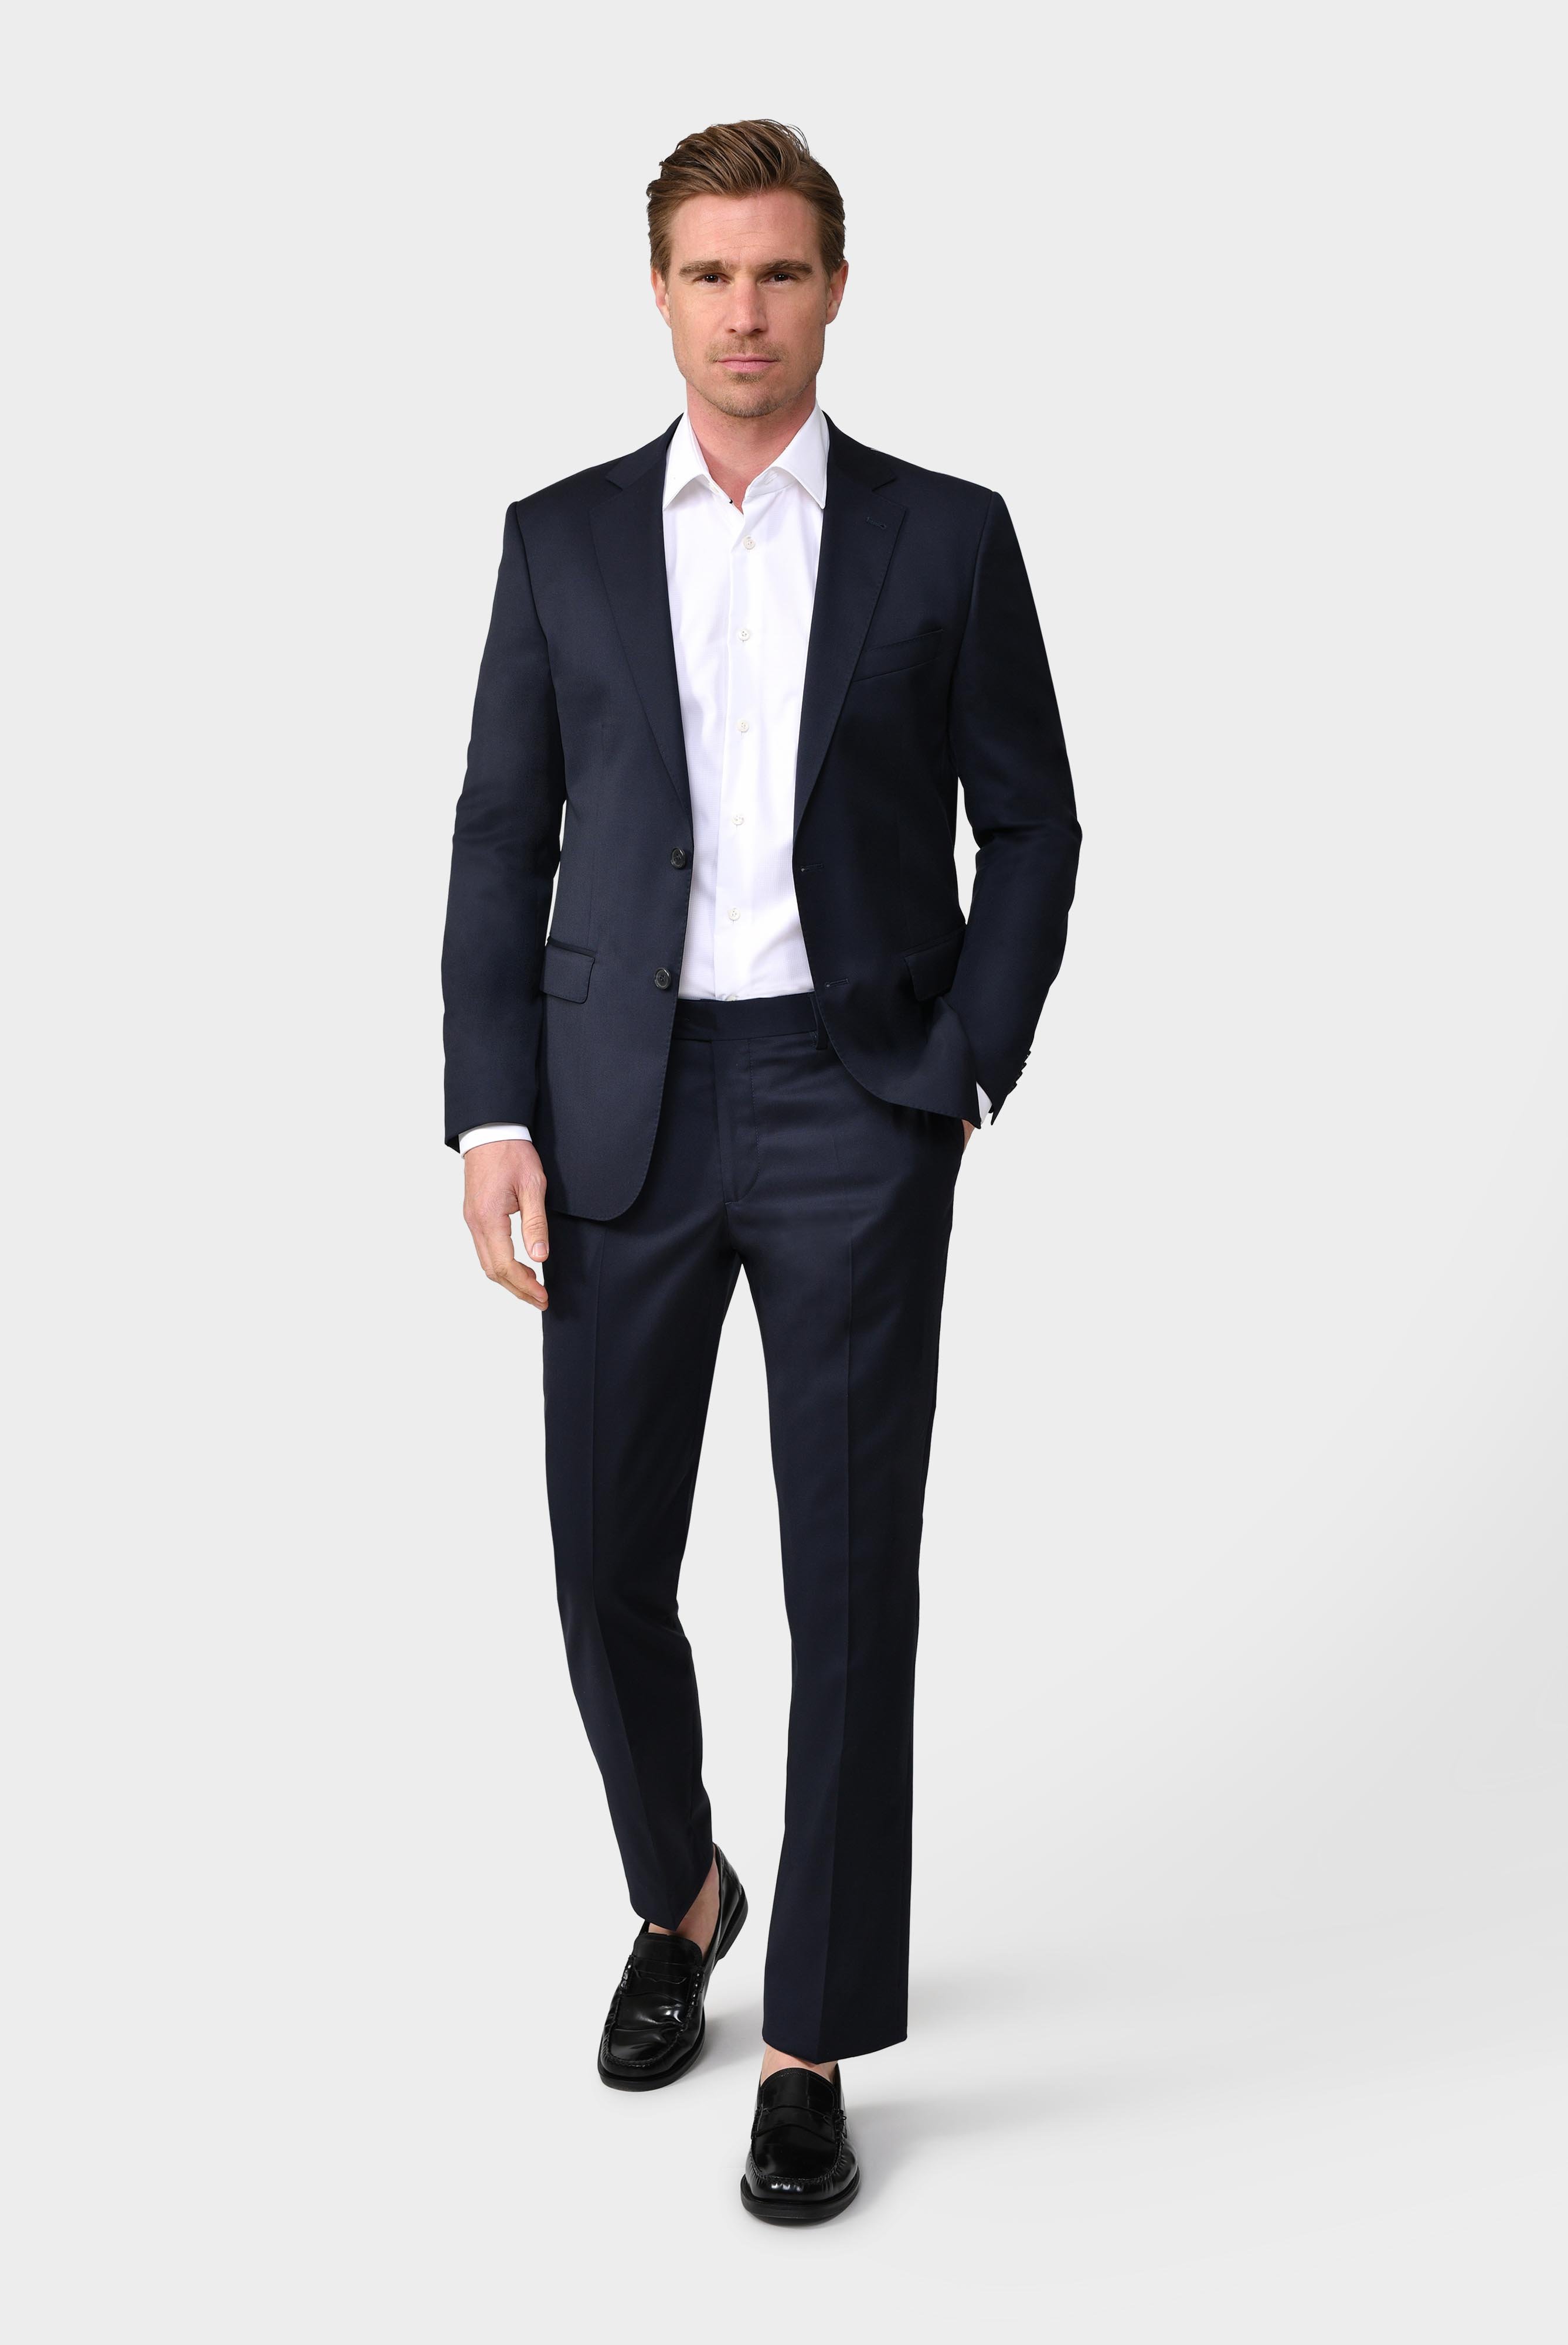 Jeans & Trousers+Men''s pants made of merino wool+80.7804.16.H01000.780.46